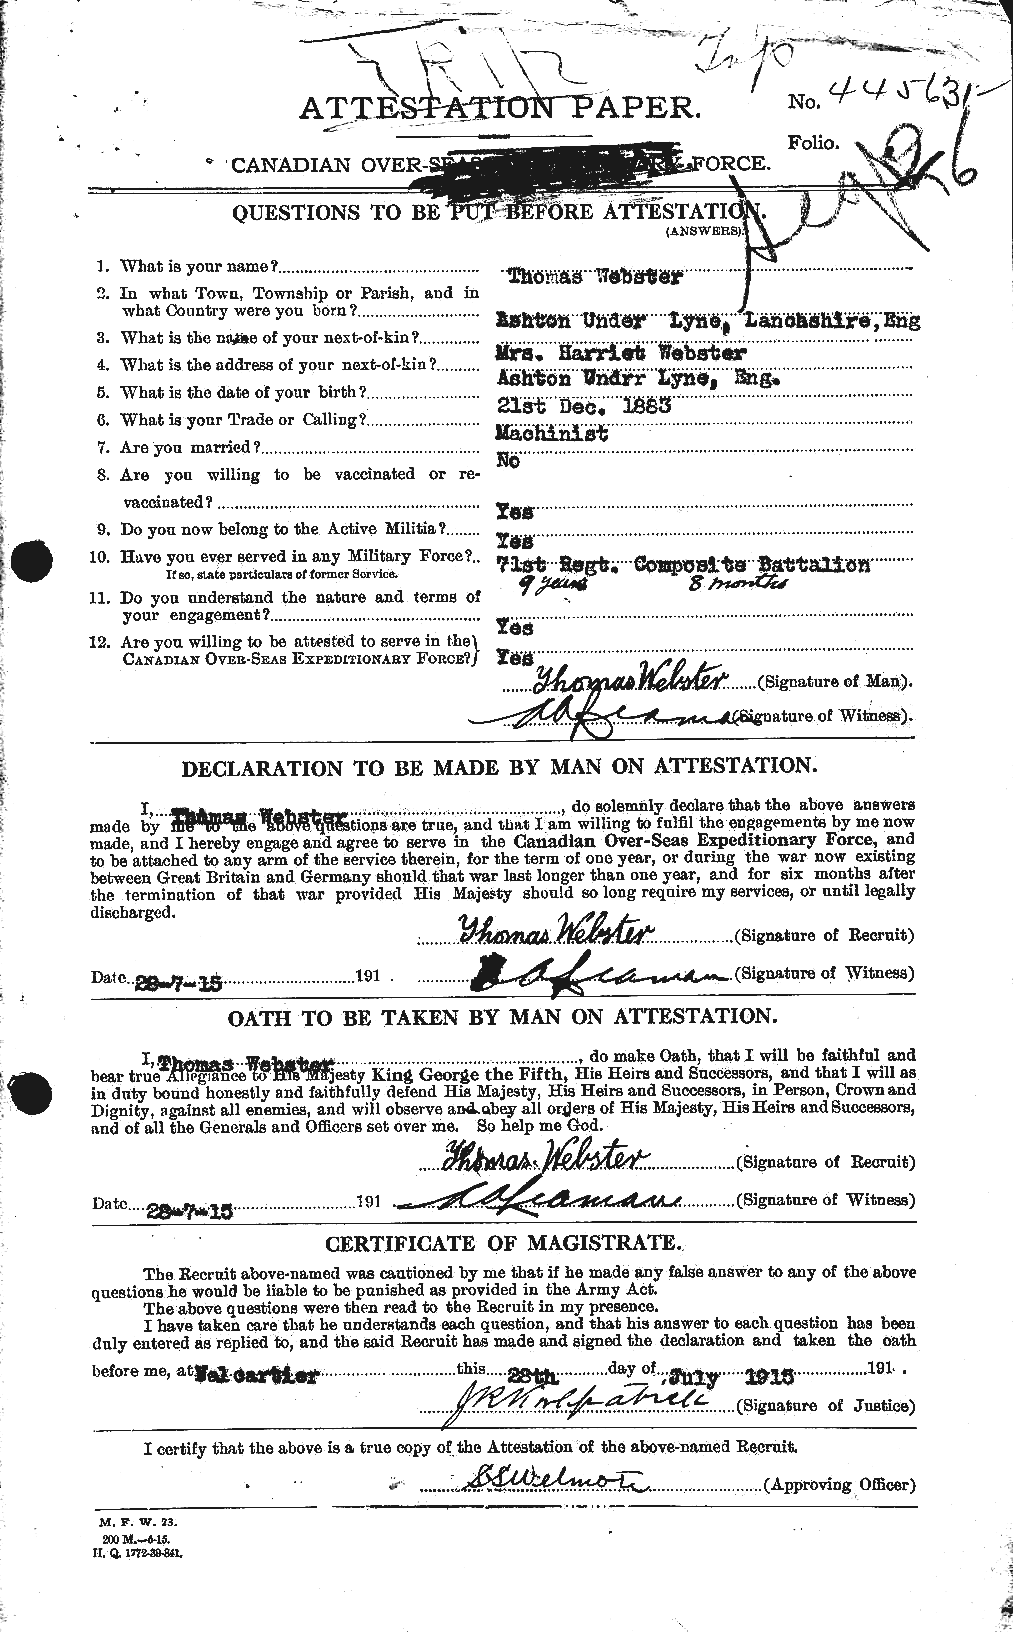 Personnel Records of the First World War - CEF 661986a